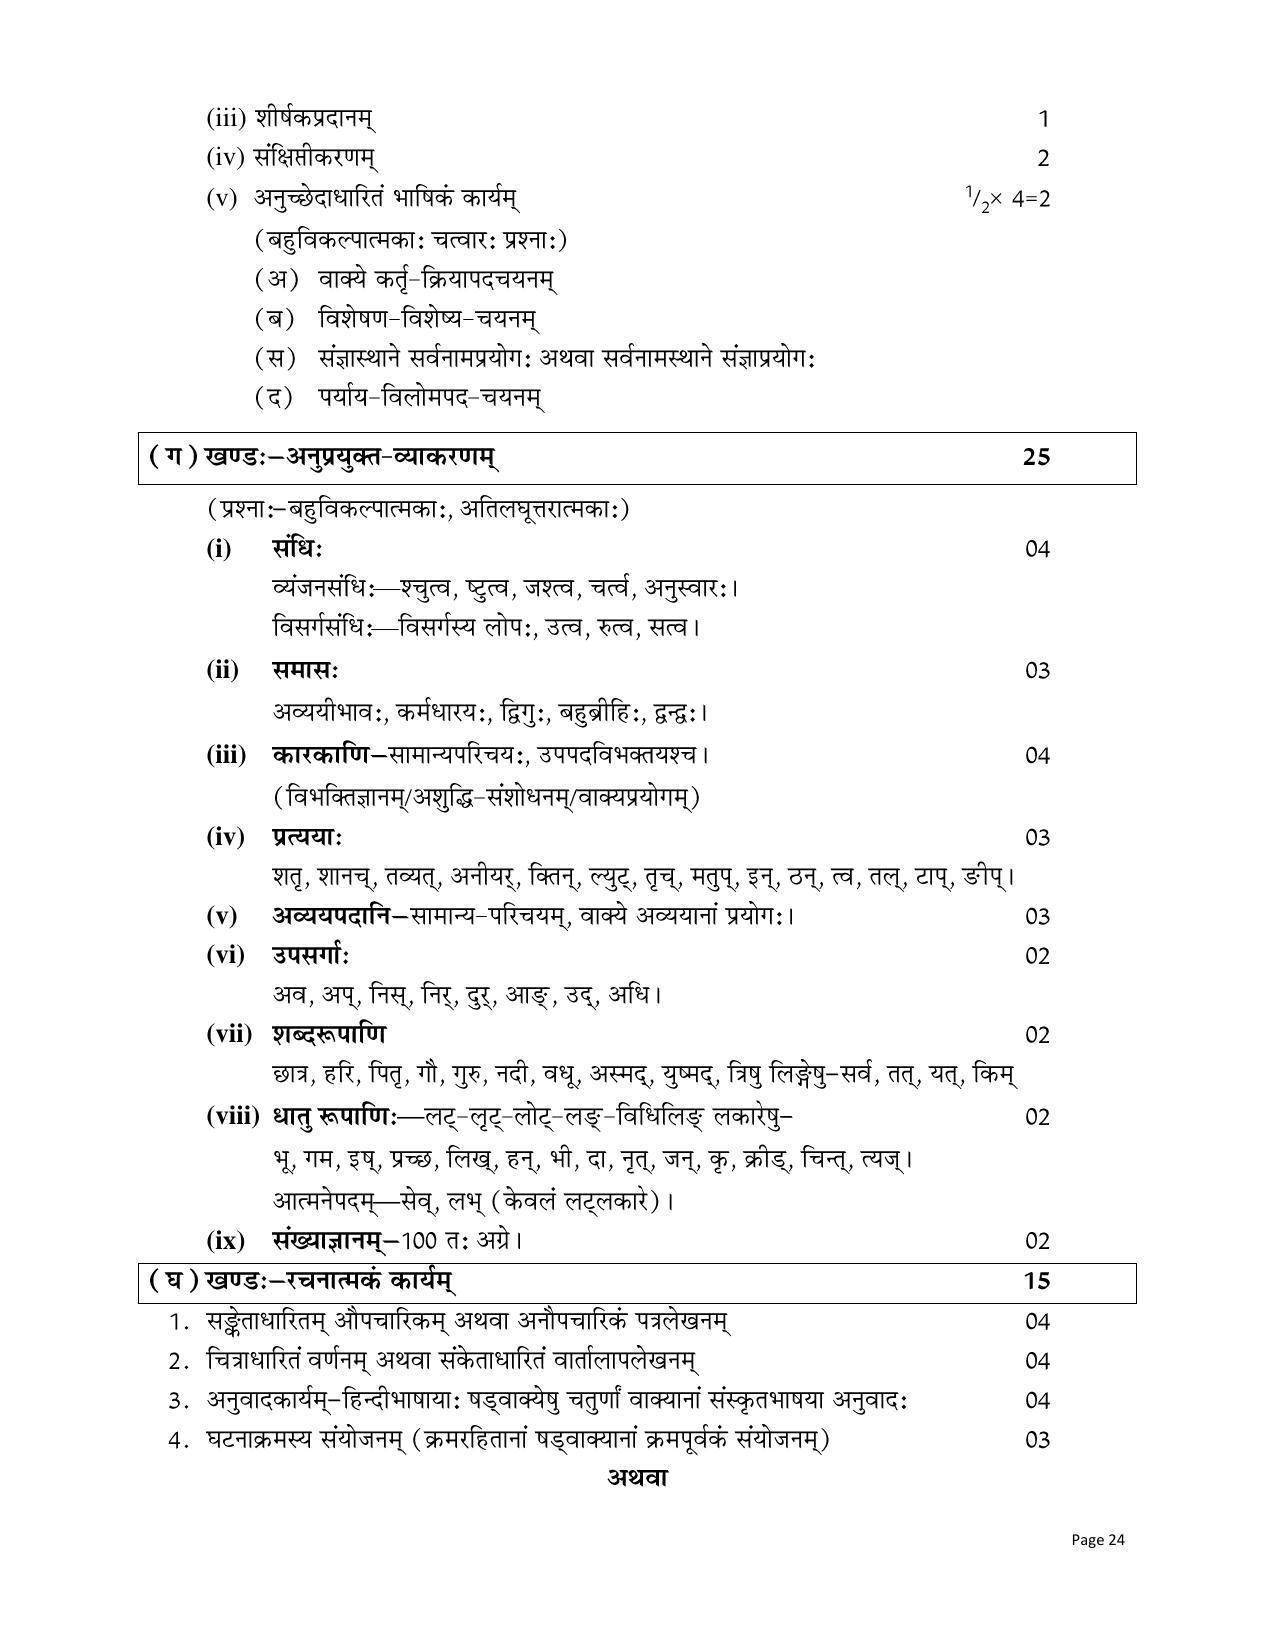 RBSE Class 10 Complete Syllabus 2023 - Page 24